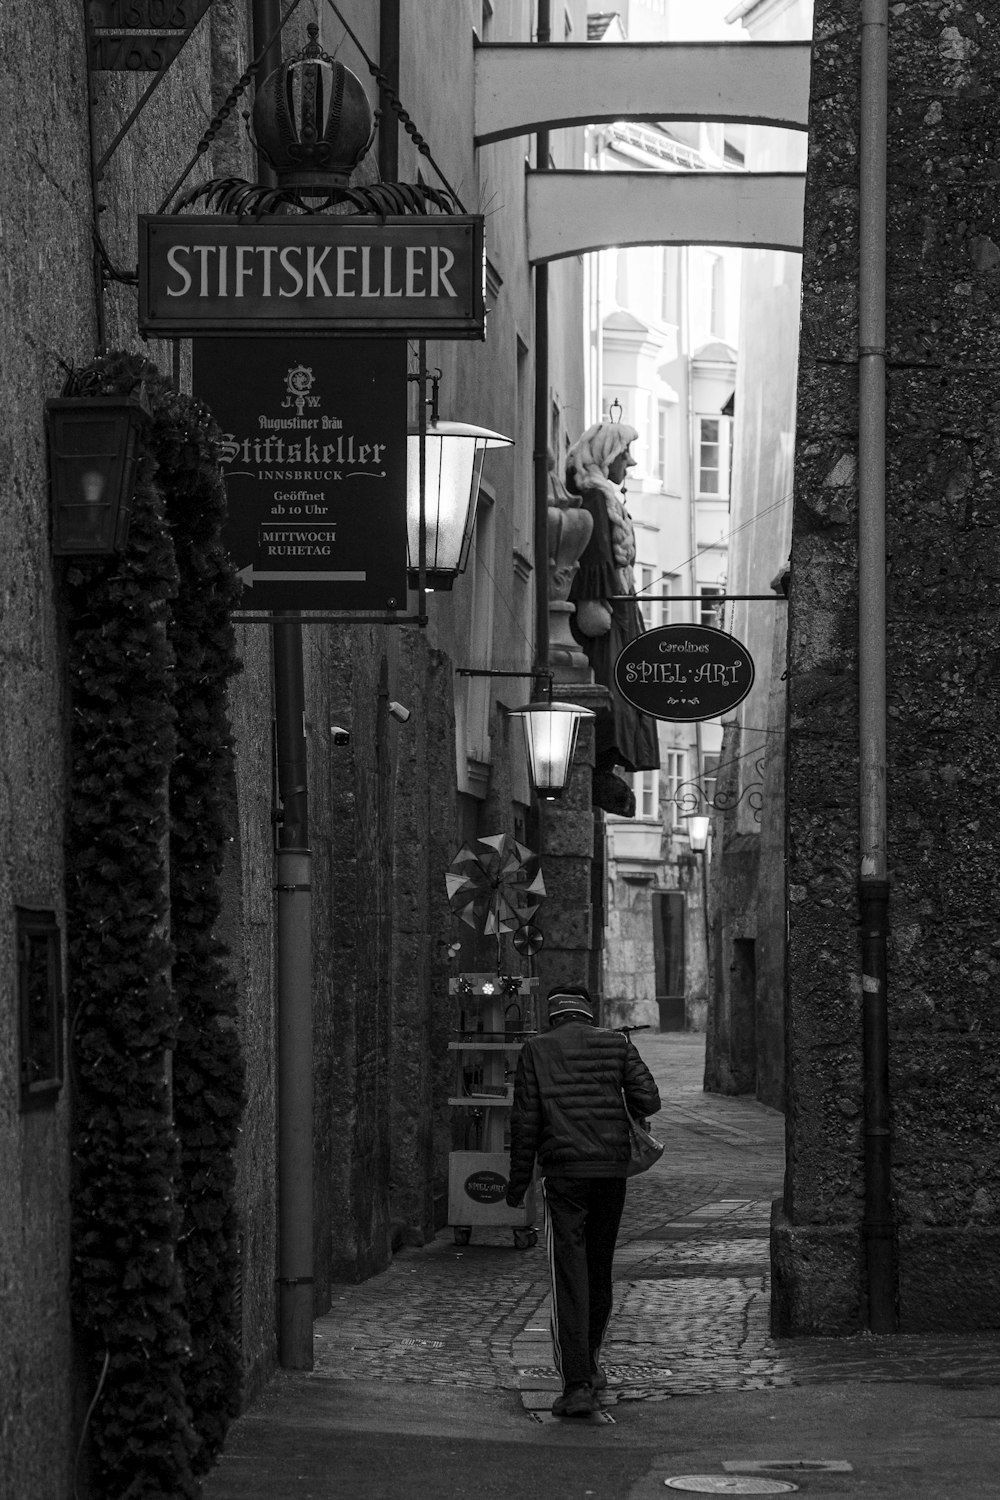 a black and white photo of a person walking down a street